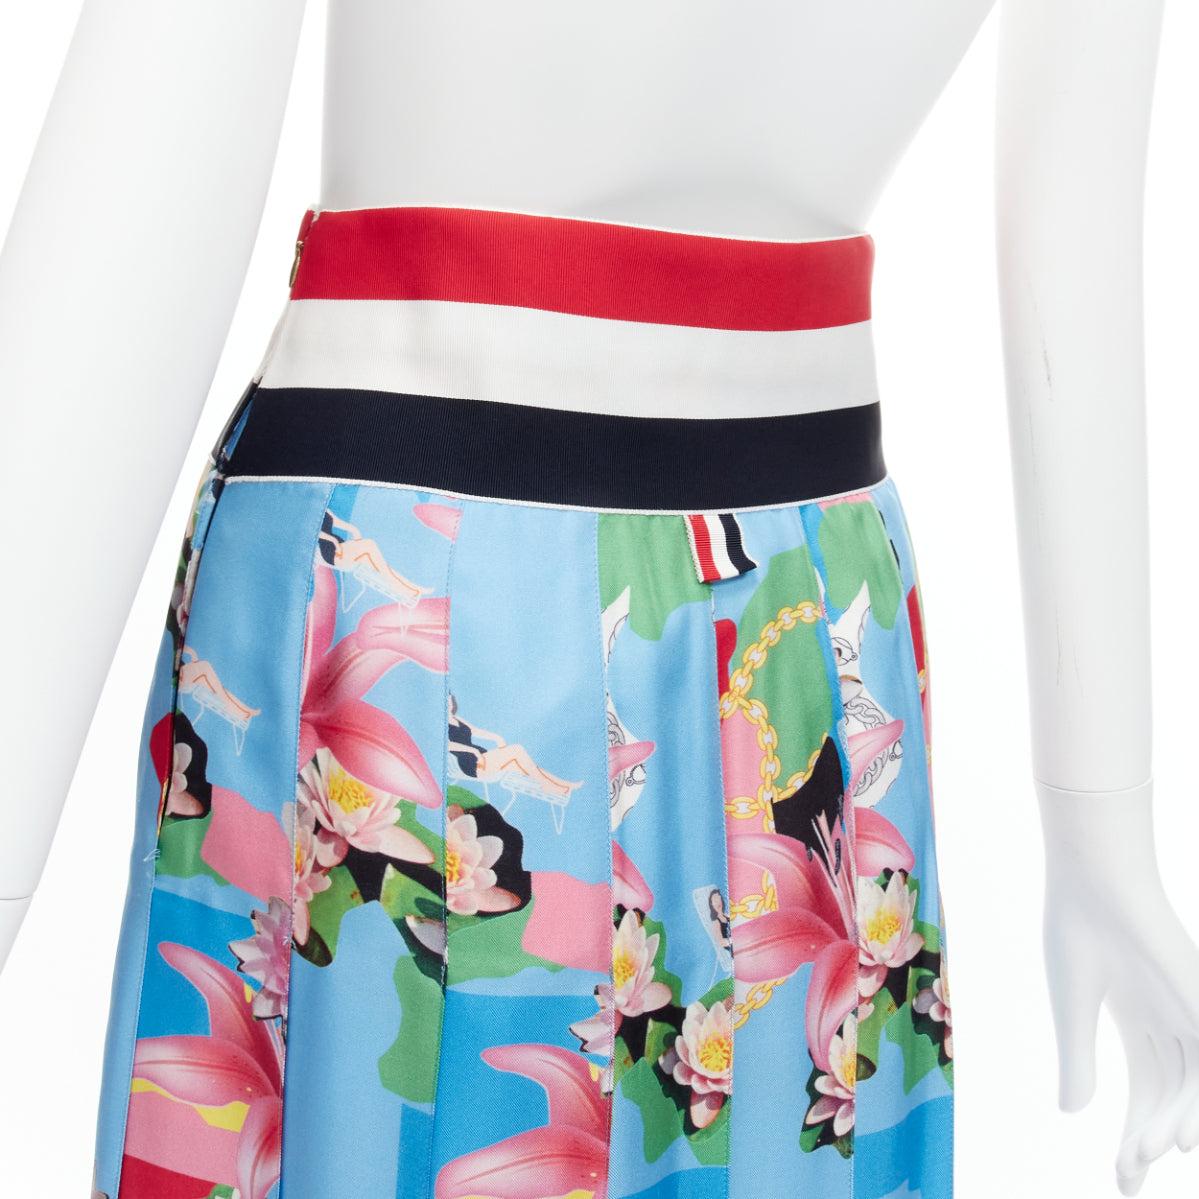 THOM BROWNE 100% silk blue floral print web waistband midi skirt IT40 S
Reference: LNKO/A02179
Brand: Thom Browne
Designer: Thom Browne
Material: Silk
Color: Blue, Multicolour
Pattern: Floral
Closure: Zip
Lining: White Fabric
Extra Details: Side zip